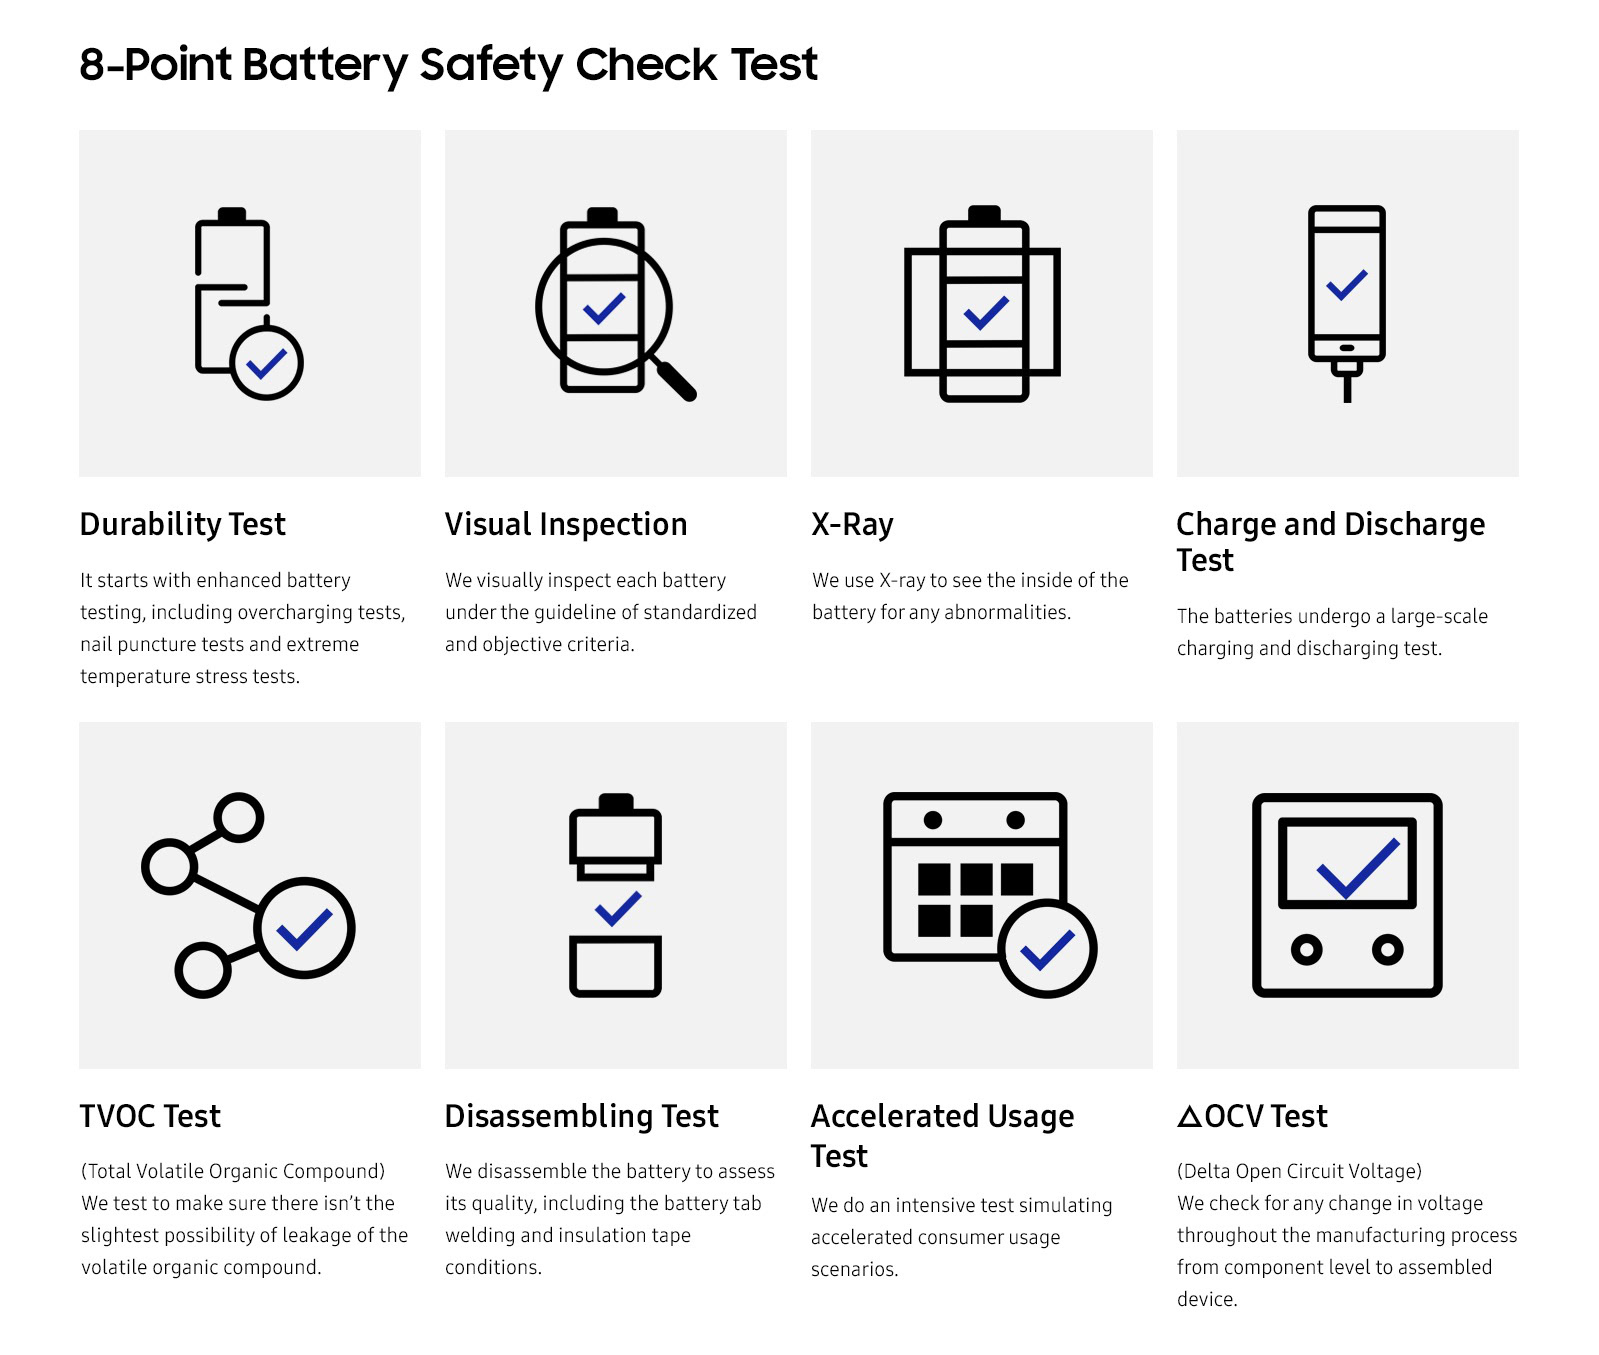 Samsung outlines 8-step battery safety after Note 7 fires